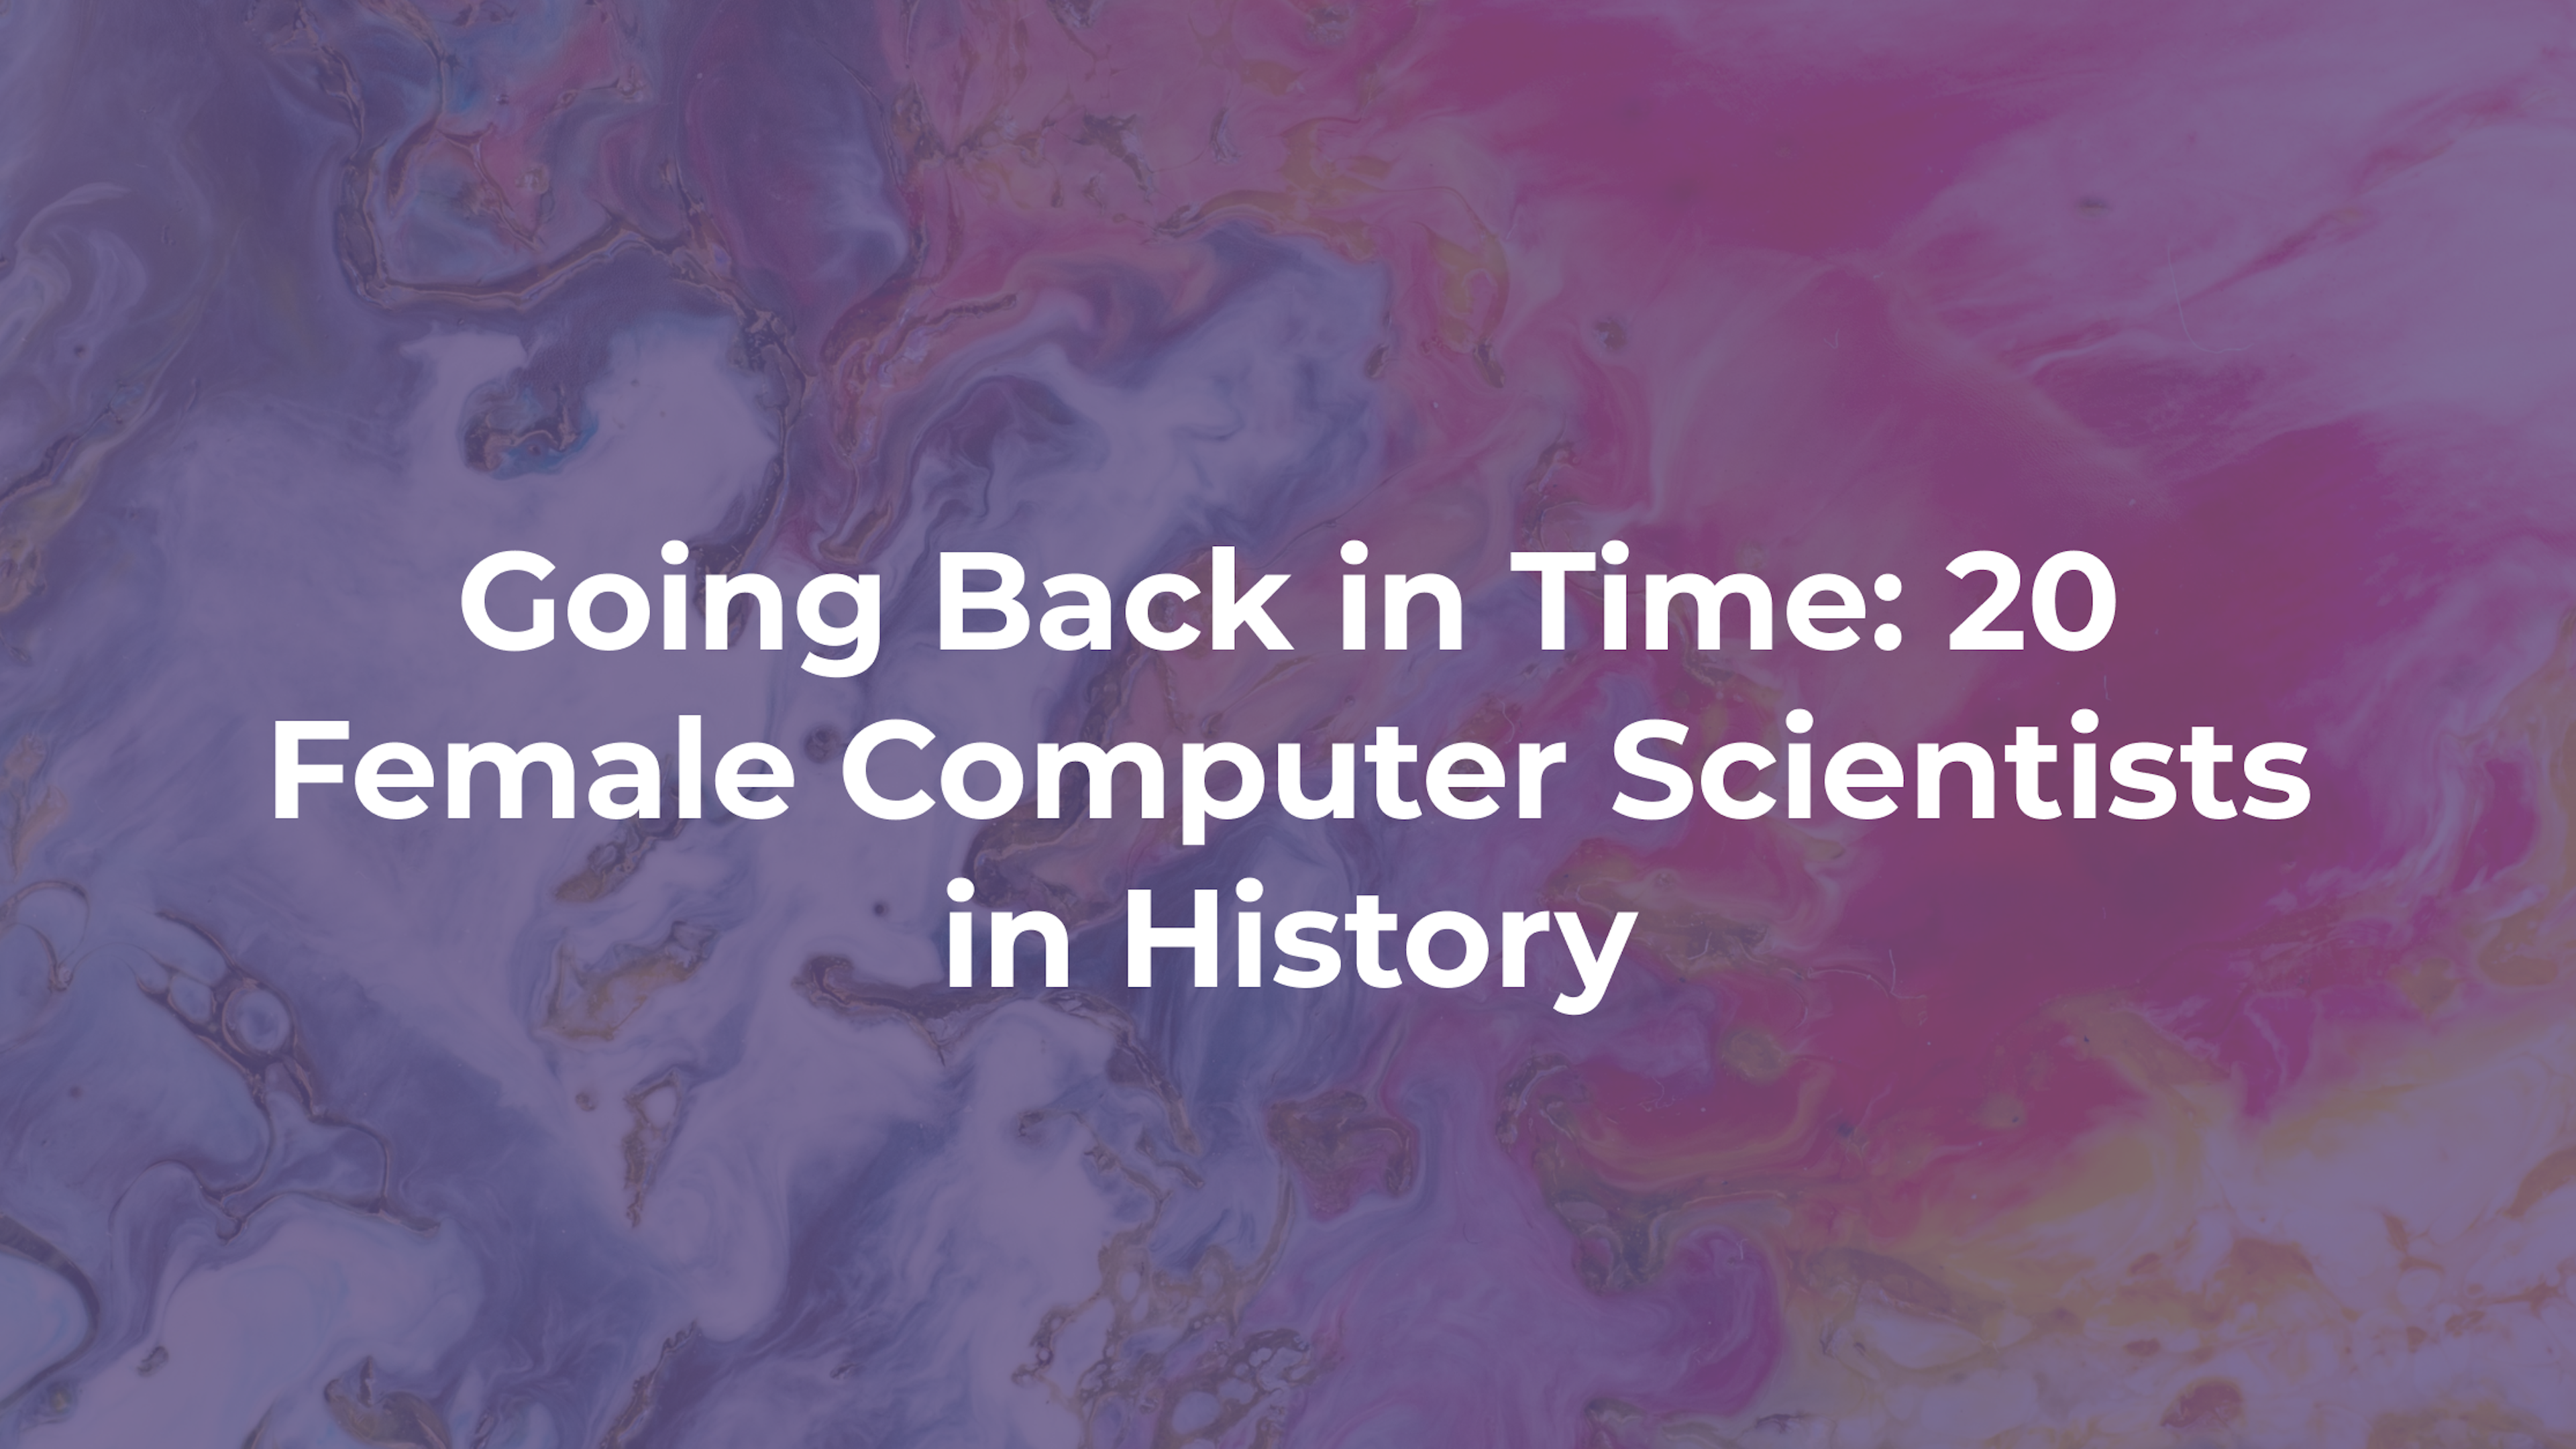 Going Back in Time: 20 Female Computer Scientists in History